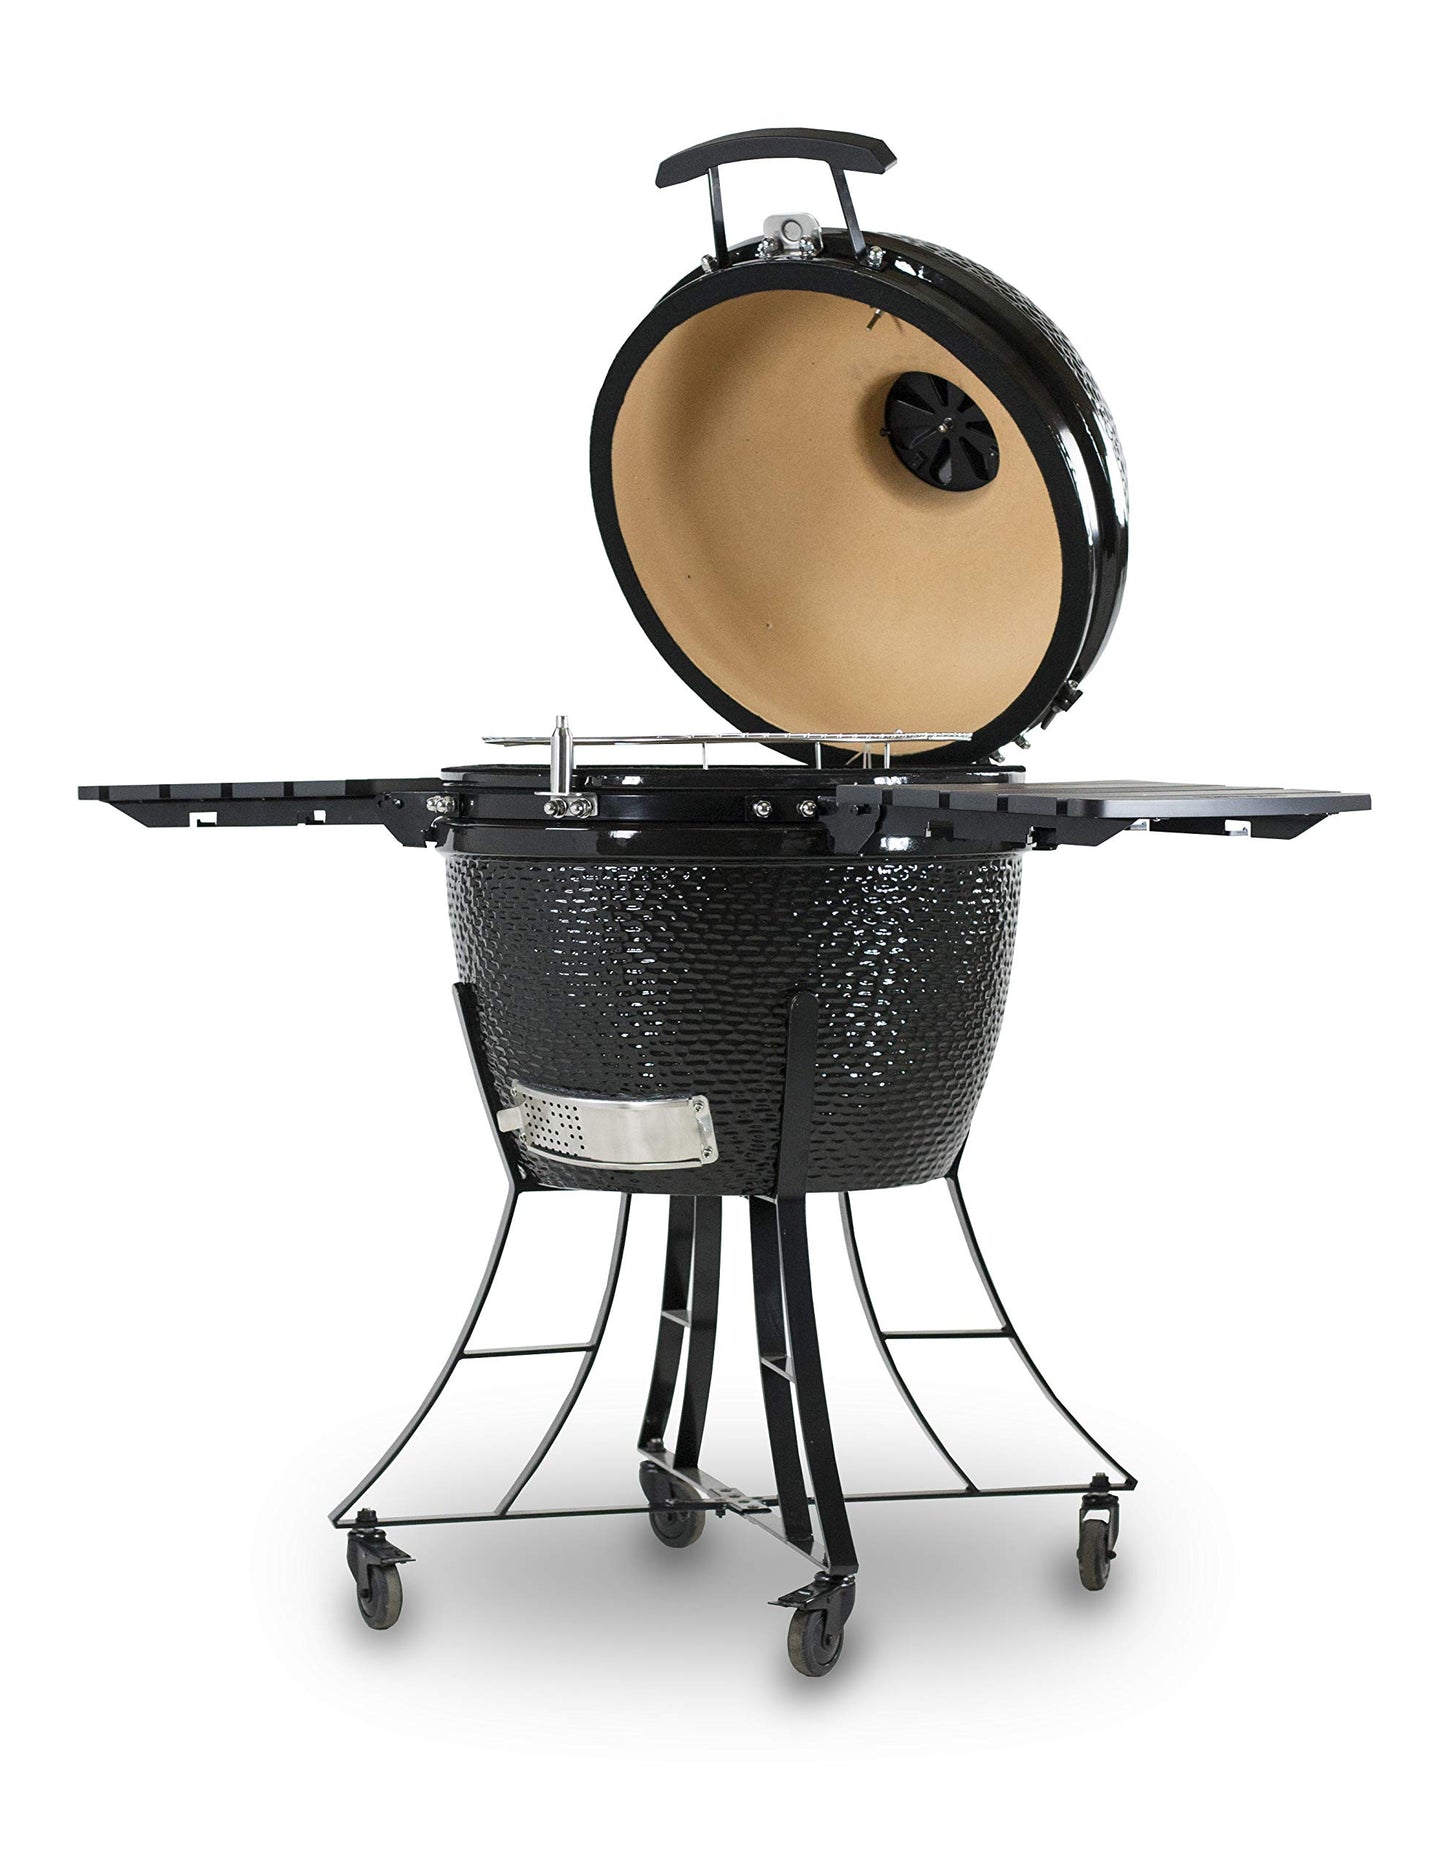 PIT BOSS 71220 Kamado Ceramic Grill Cooker, 22 inch